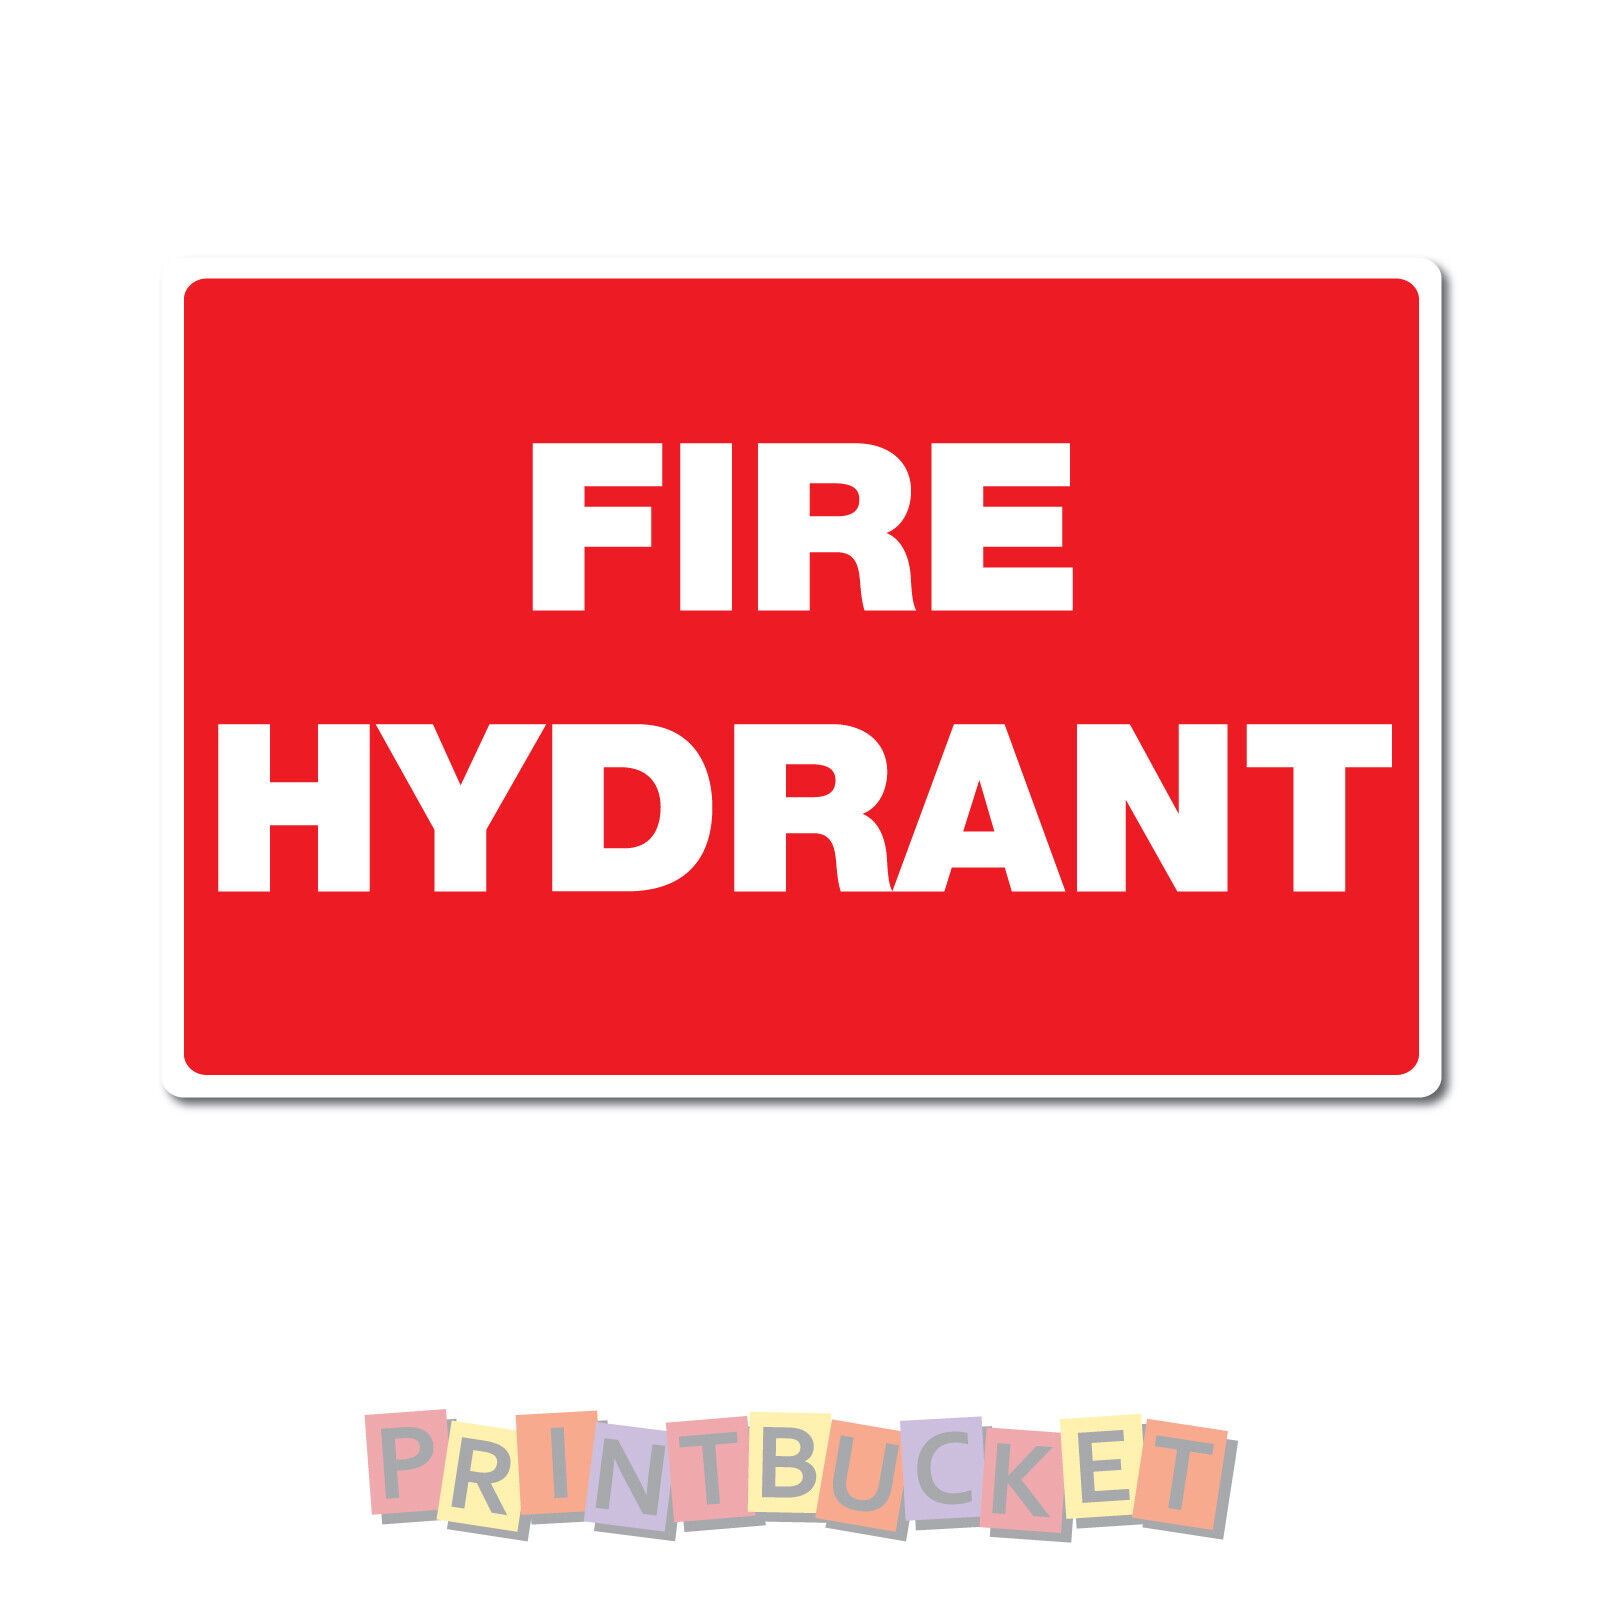 Fire Hydrant sign 190mm x New York Mall Overseas parallel import regular item water quality 290mm proof